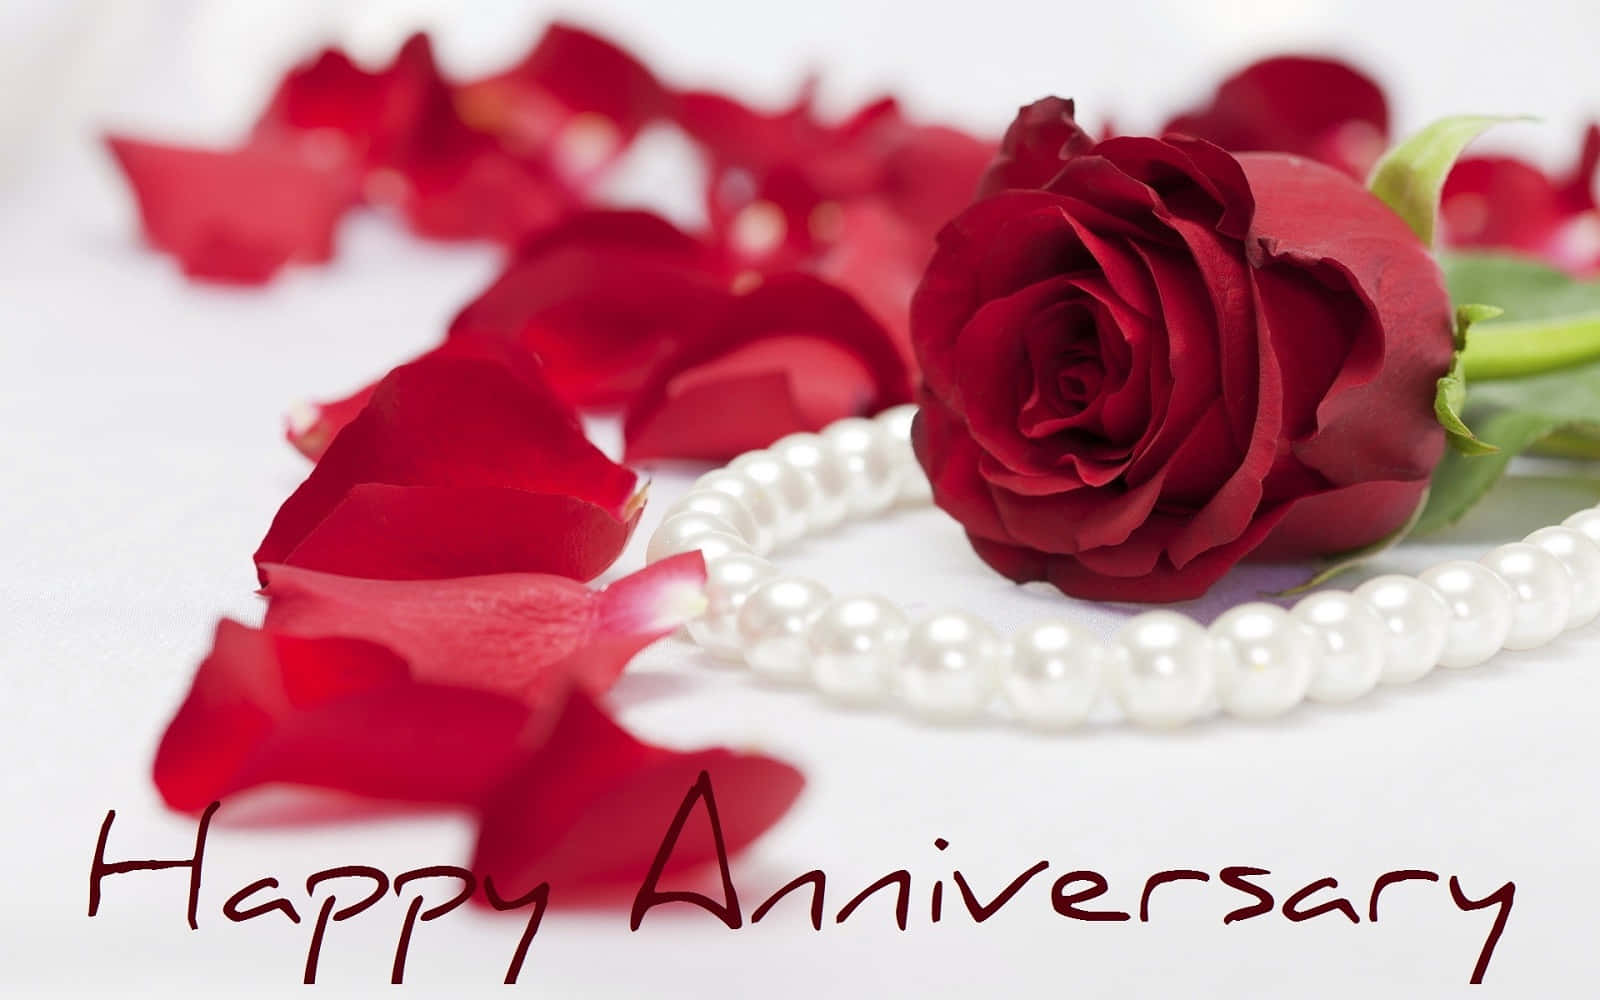 Caption: Elegant Pearl Necklace Adorning a Red Rose on a Romantic Anniversary Wallpaper